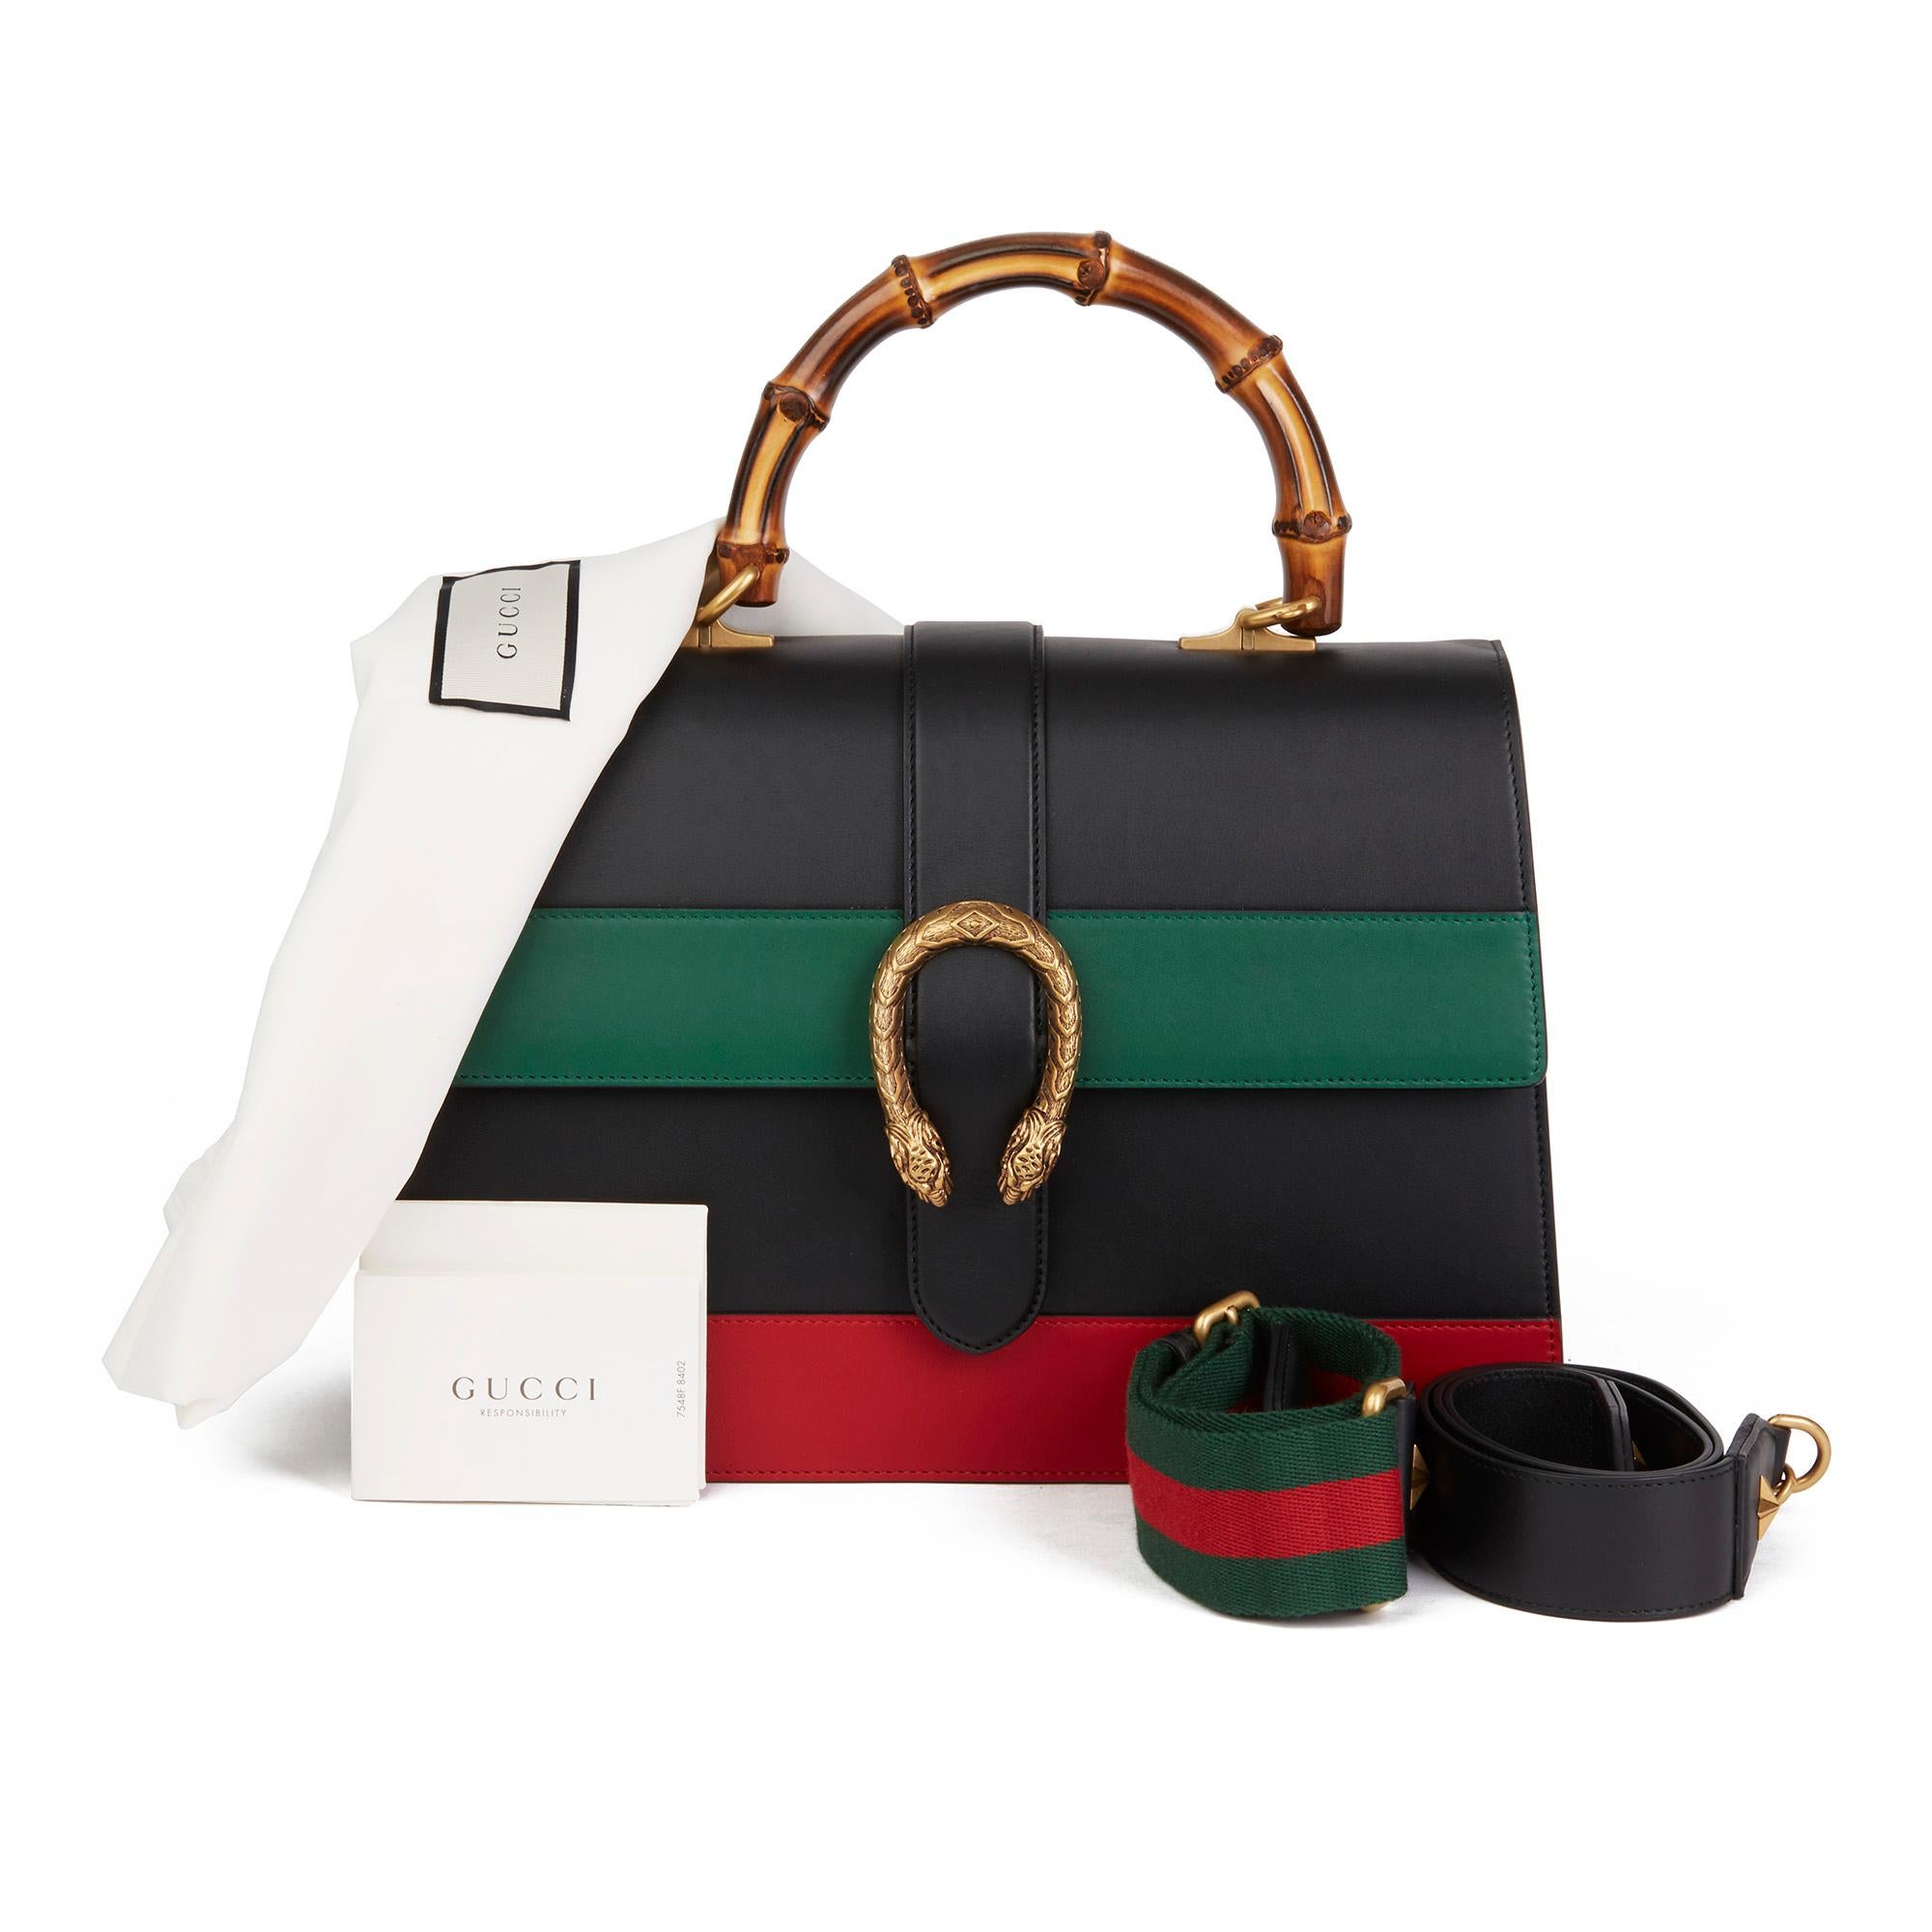 2020 Gucci Black, Green & Red Smooth Calfskin Large Dionysus Bamboo Top Handle  5